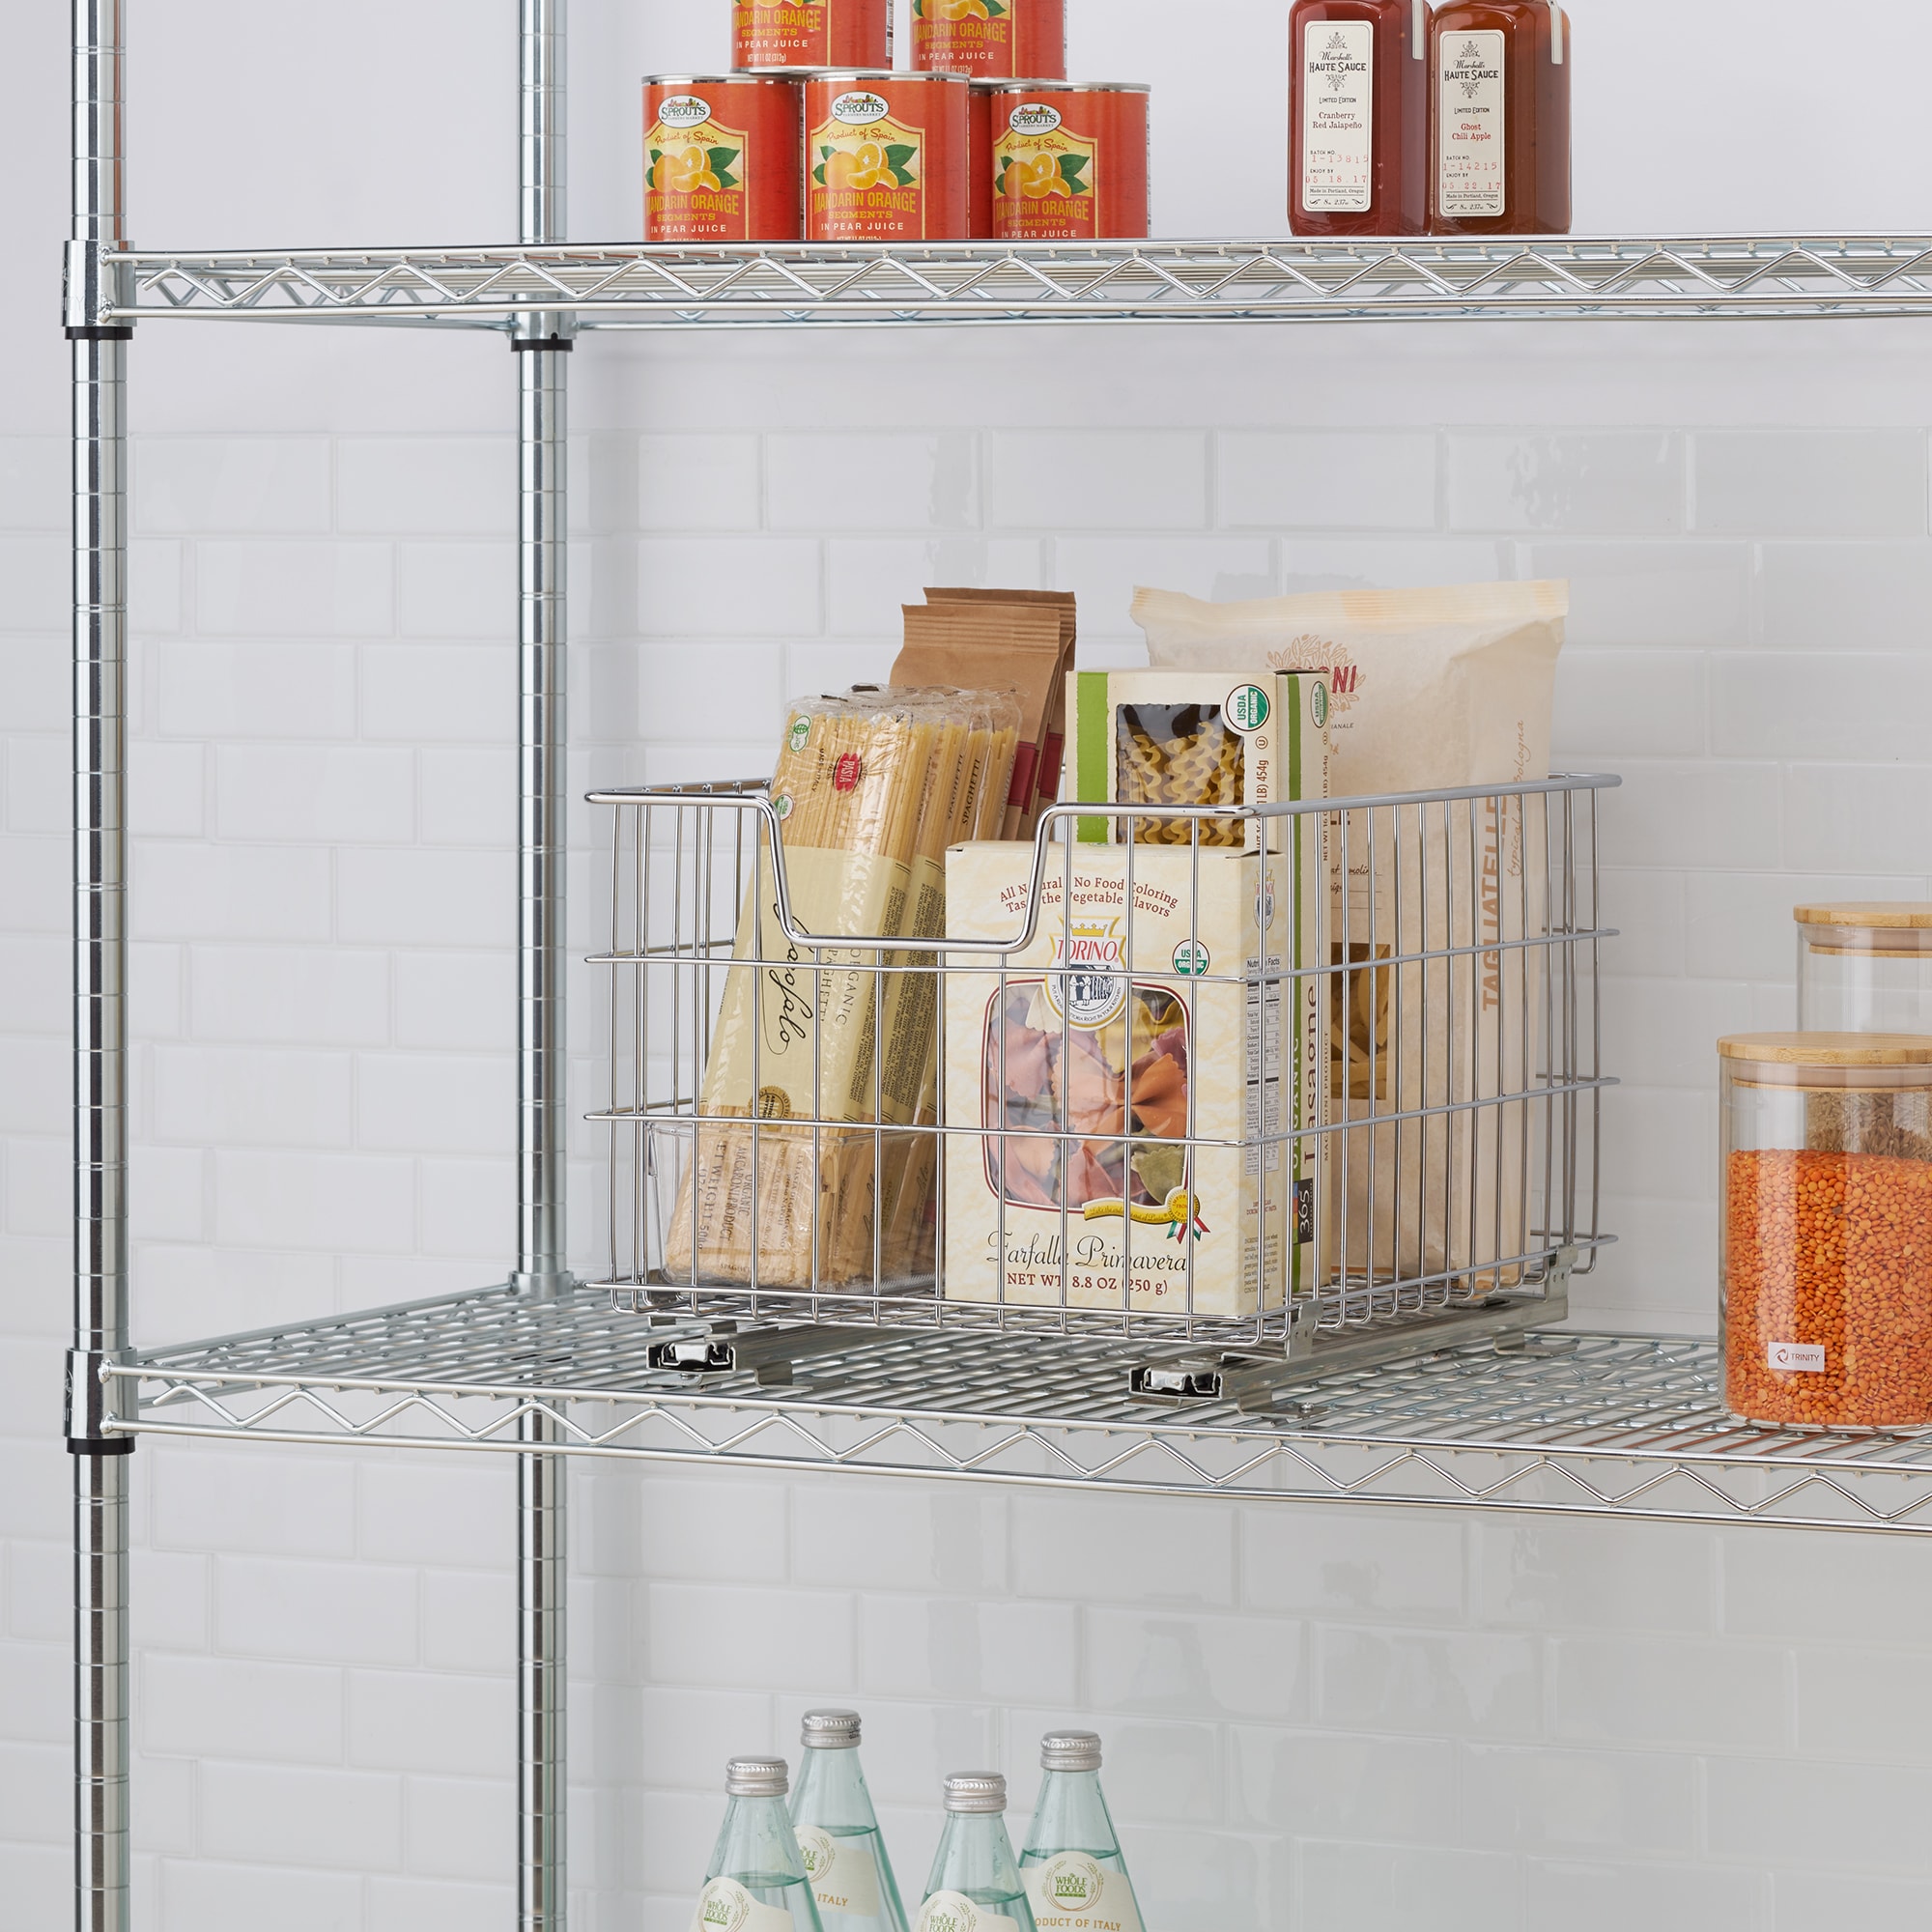 COMFECTO Comfecto Under Shelf Basket, 2 Pack Stainless Steel Wire